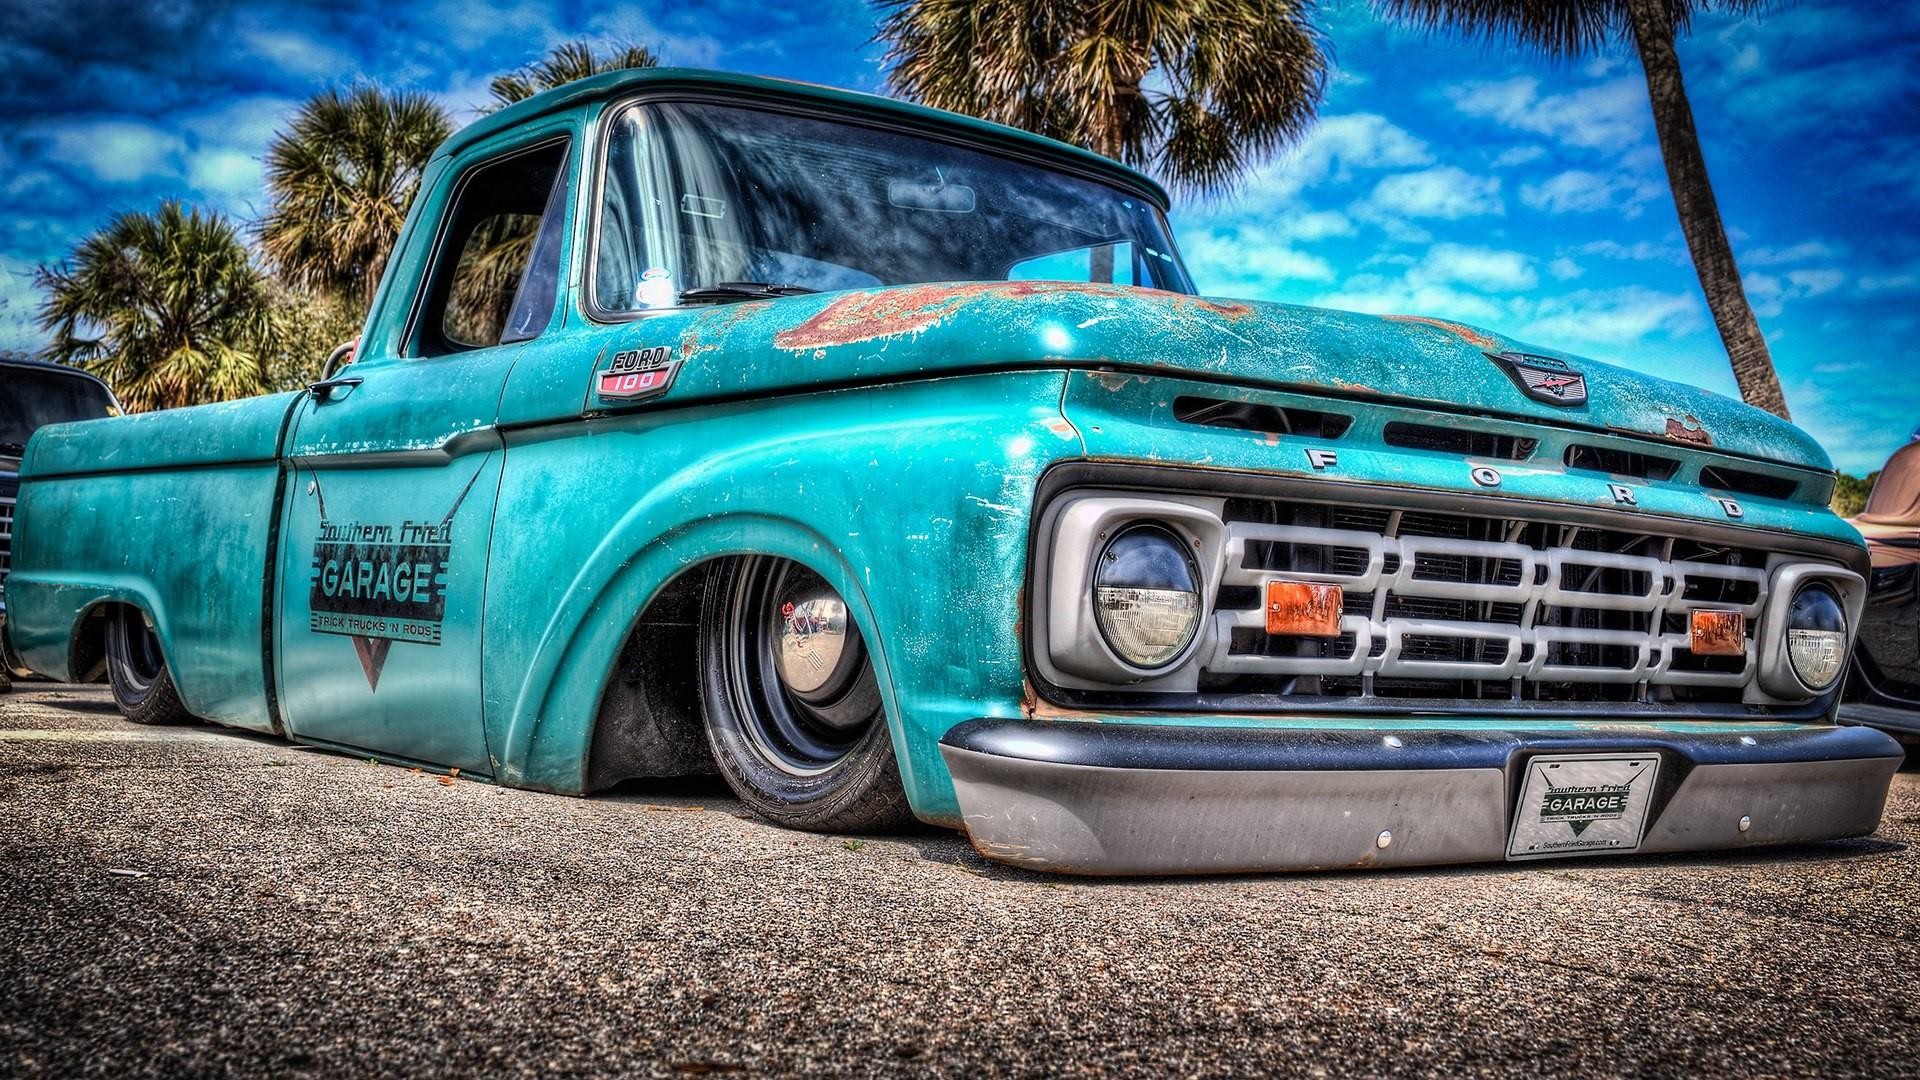 Old Ford Truck Wallpaper.